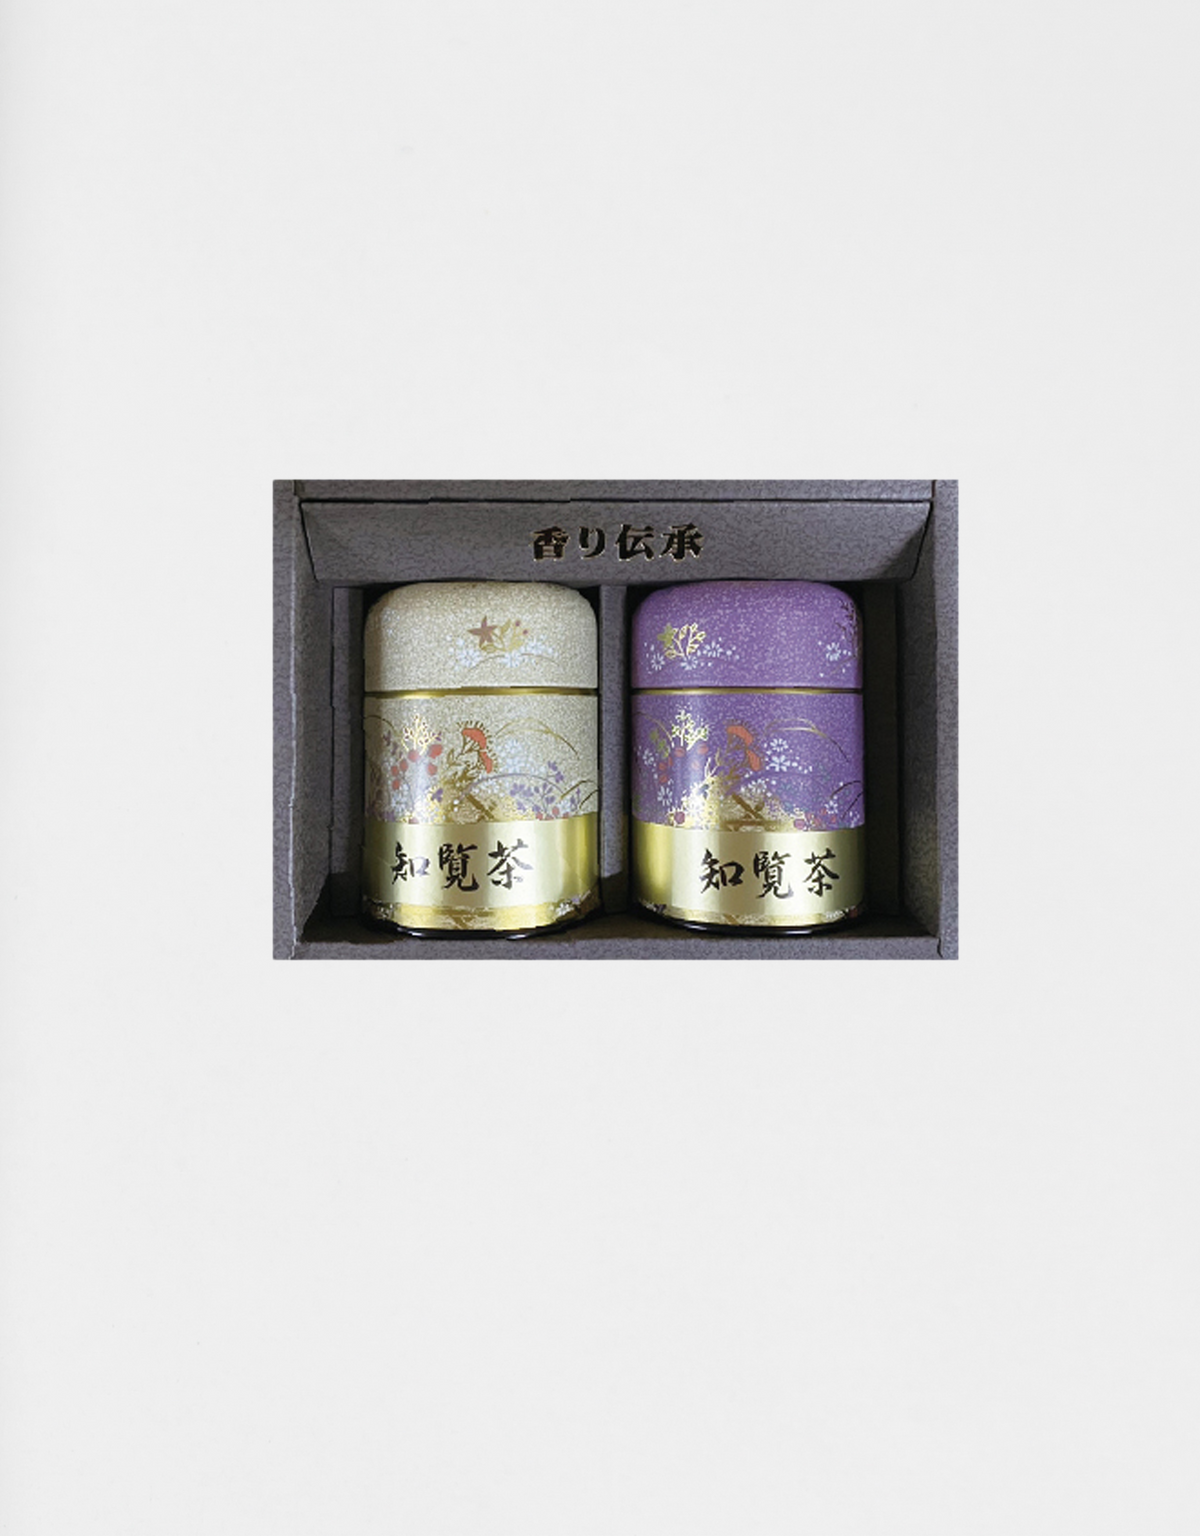 Chiran tea canned gift [gift]